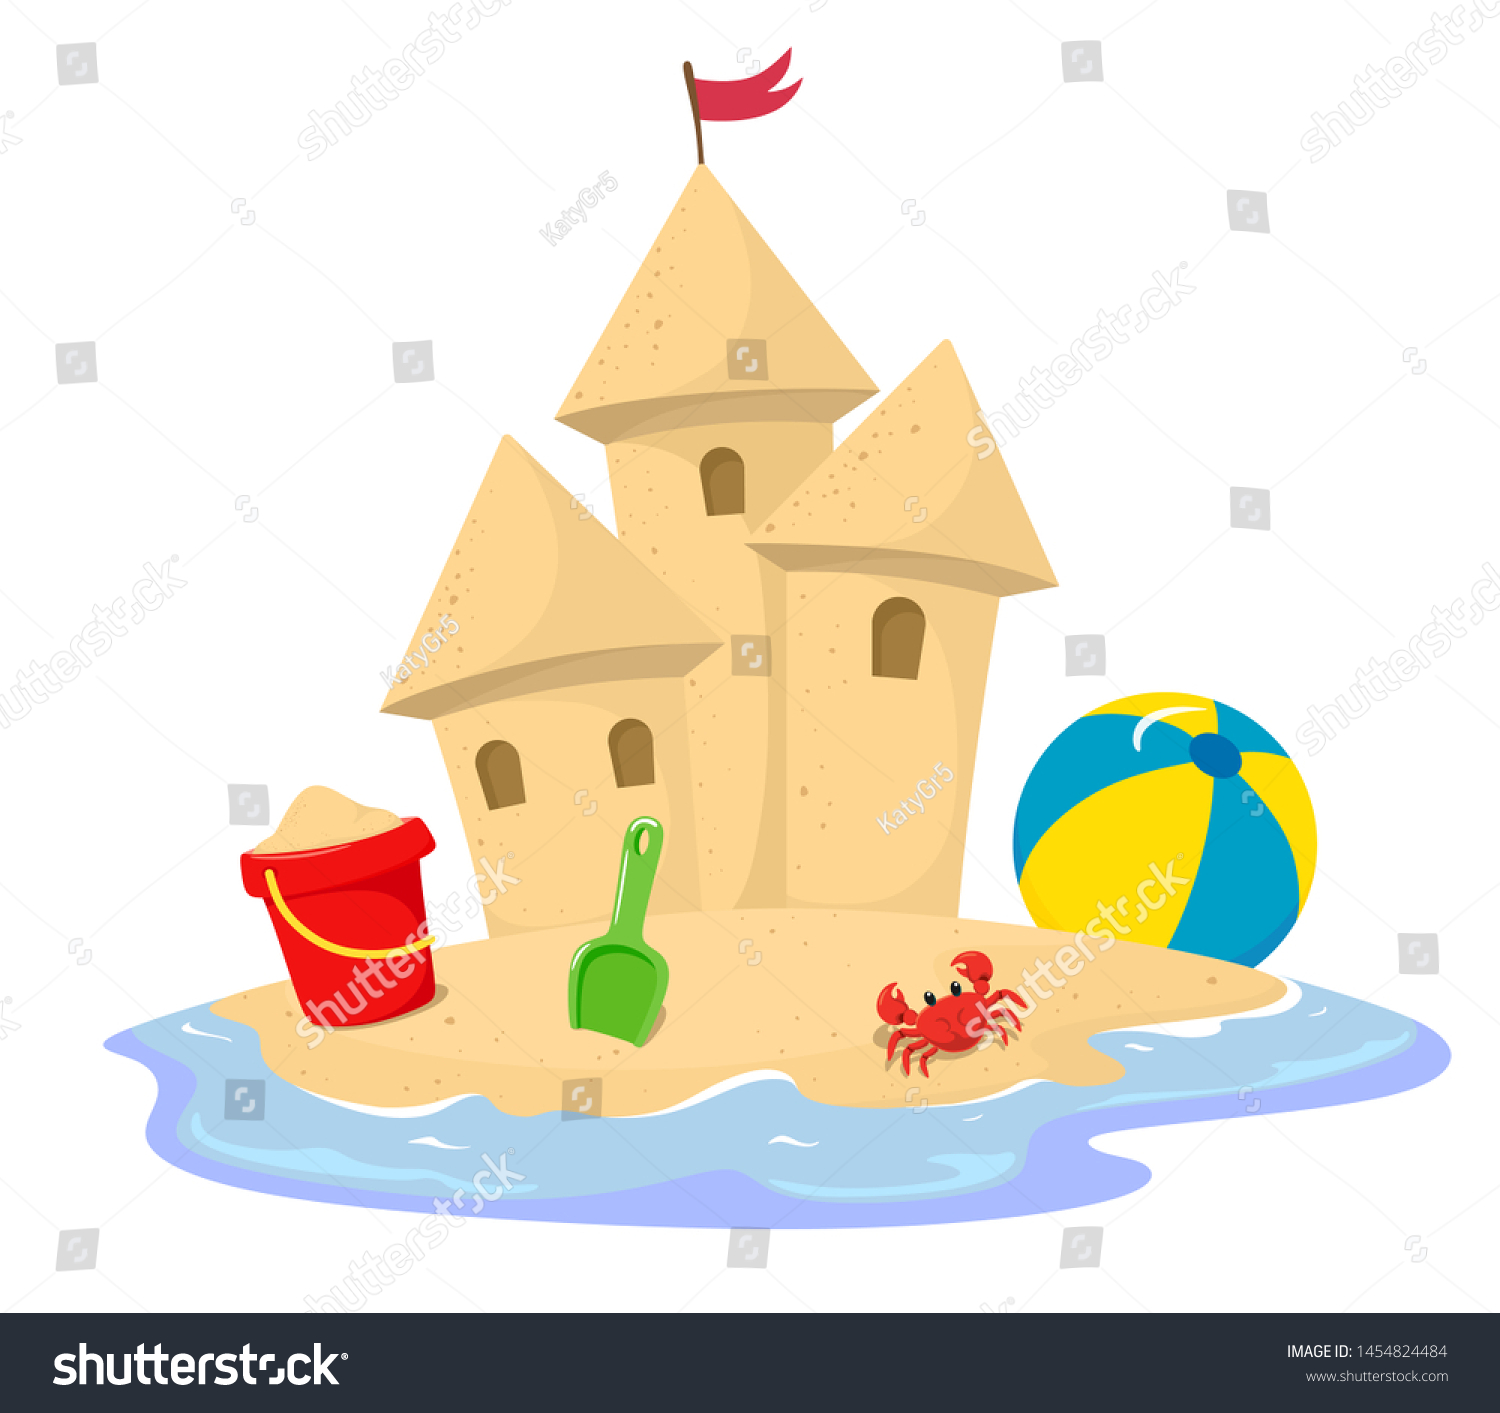 SVG of Sand castle surrounded by water with a bucket, crab, spatula and ball. Vector illustration in cartoon style on a white background. svg